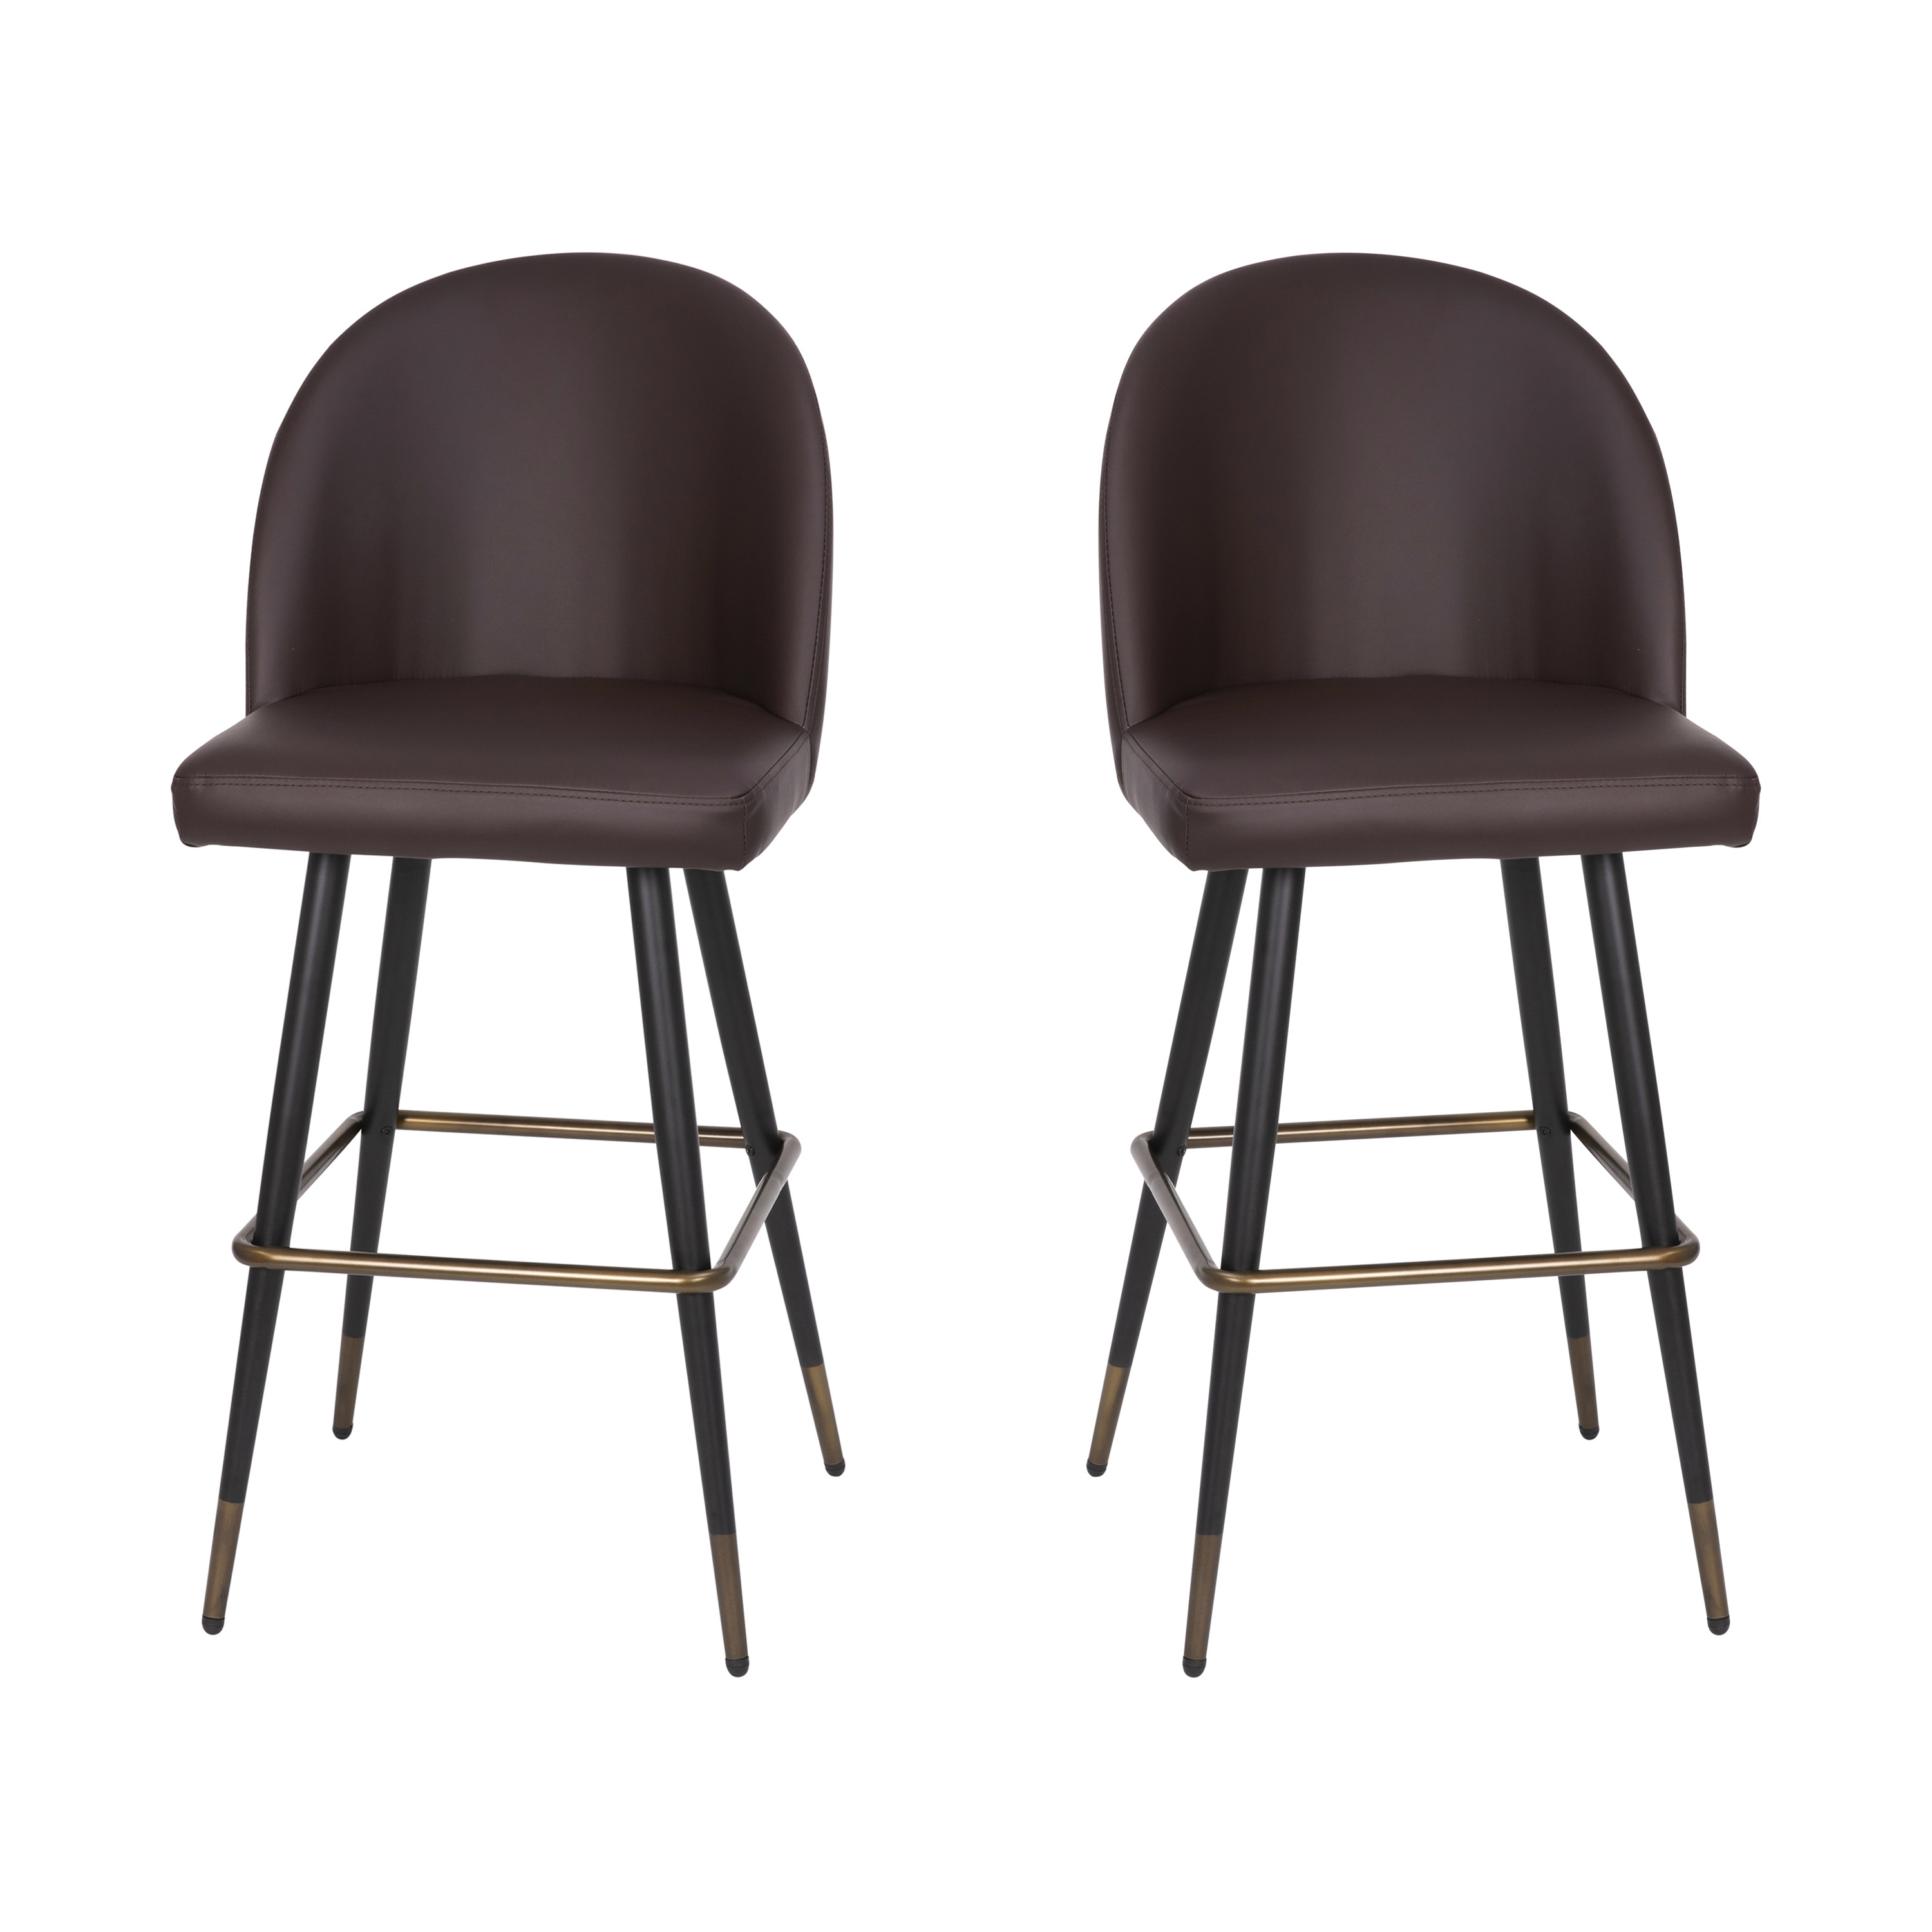 Flash Furniture AY-1026H-30-BR-GG Brown LeatherSoft High Back Modern Armless 30" Bar Stool with Contoured Backrest, Set of 2